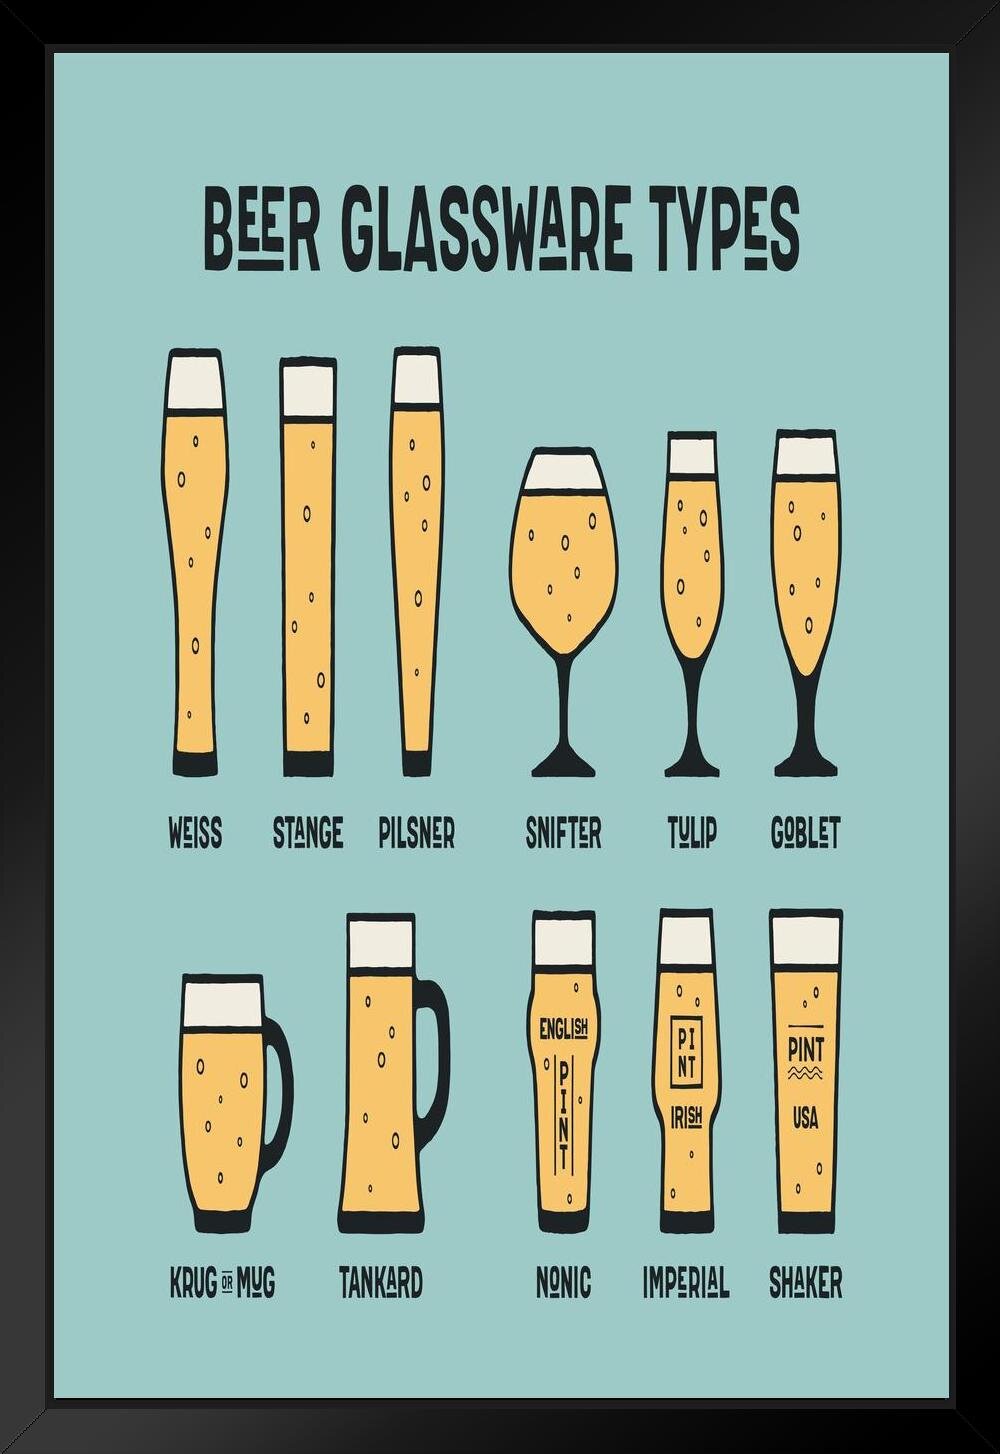 Types of Beer Glasses and Styles of Beer Reference Guide Chart Home Bar Decor Pub Decor Ipa Beer Mug Pint Glass Beer Sign Porter Stout Ale Beer Stein